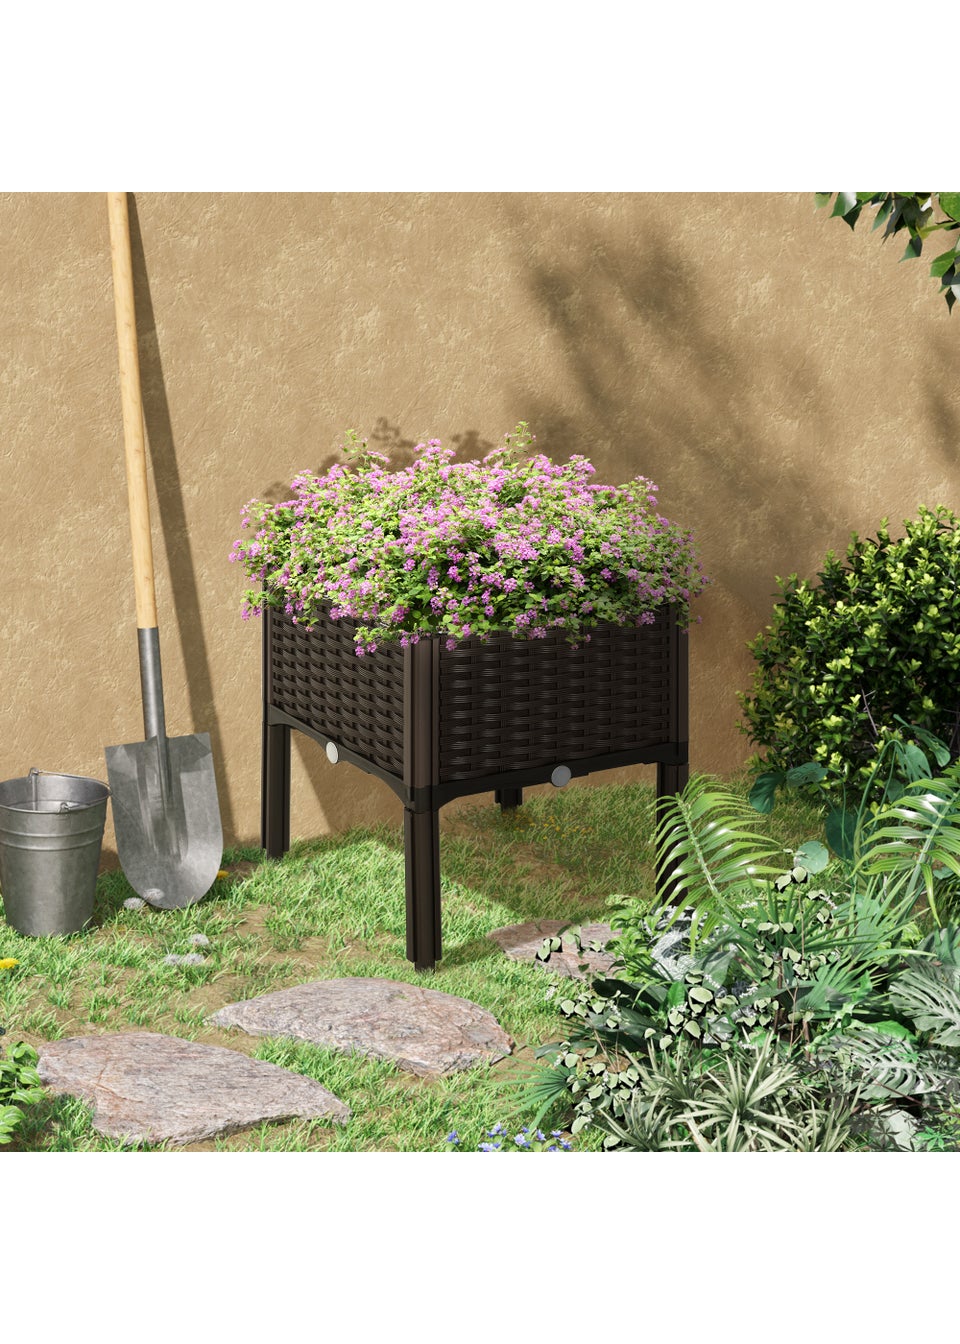 Outsunny Elevated Flower Bed (40cm x 40cm x 44cm)